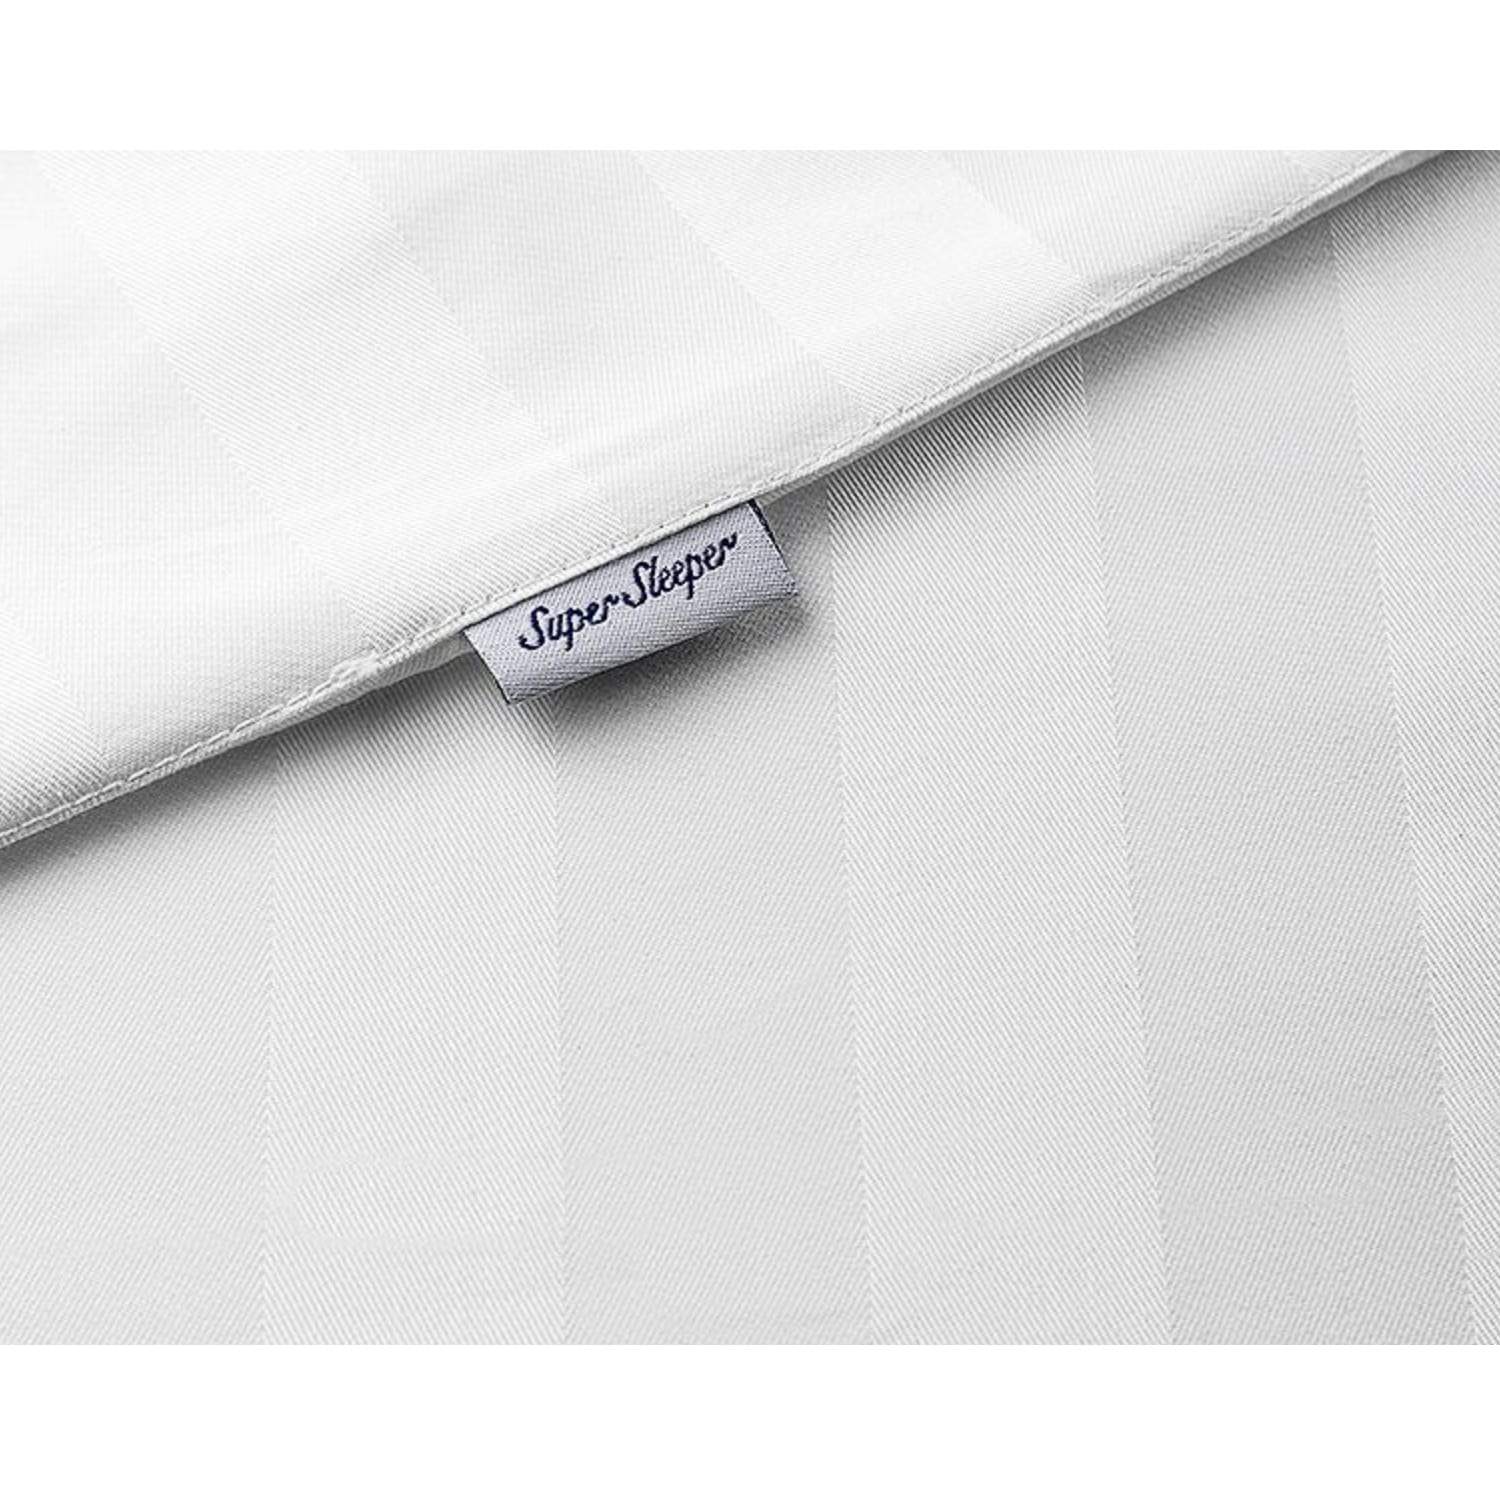 Zoomed in Royal Deluxe Breathable Cotton Dream Sheet to see Super Sleeper tag, texture and pattern